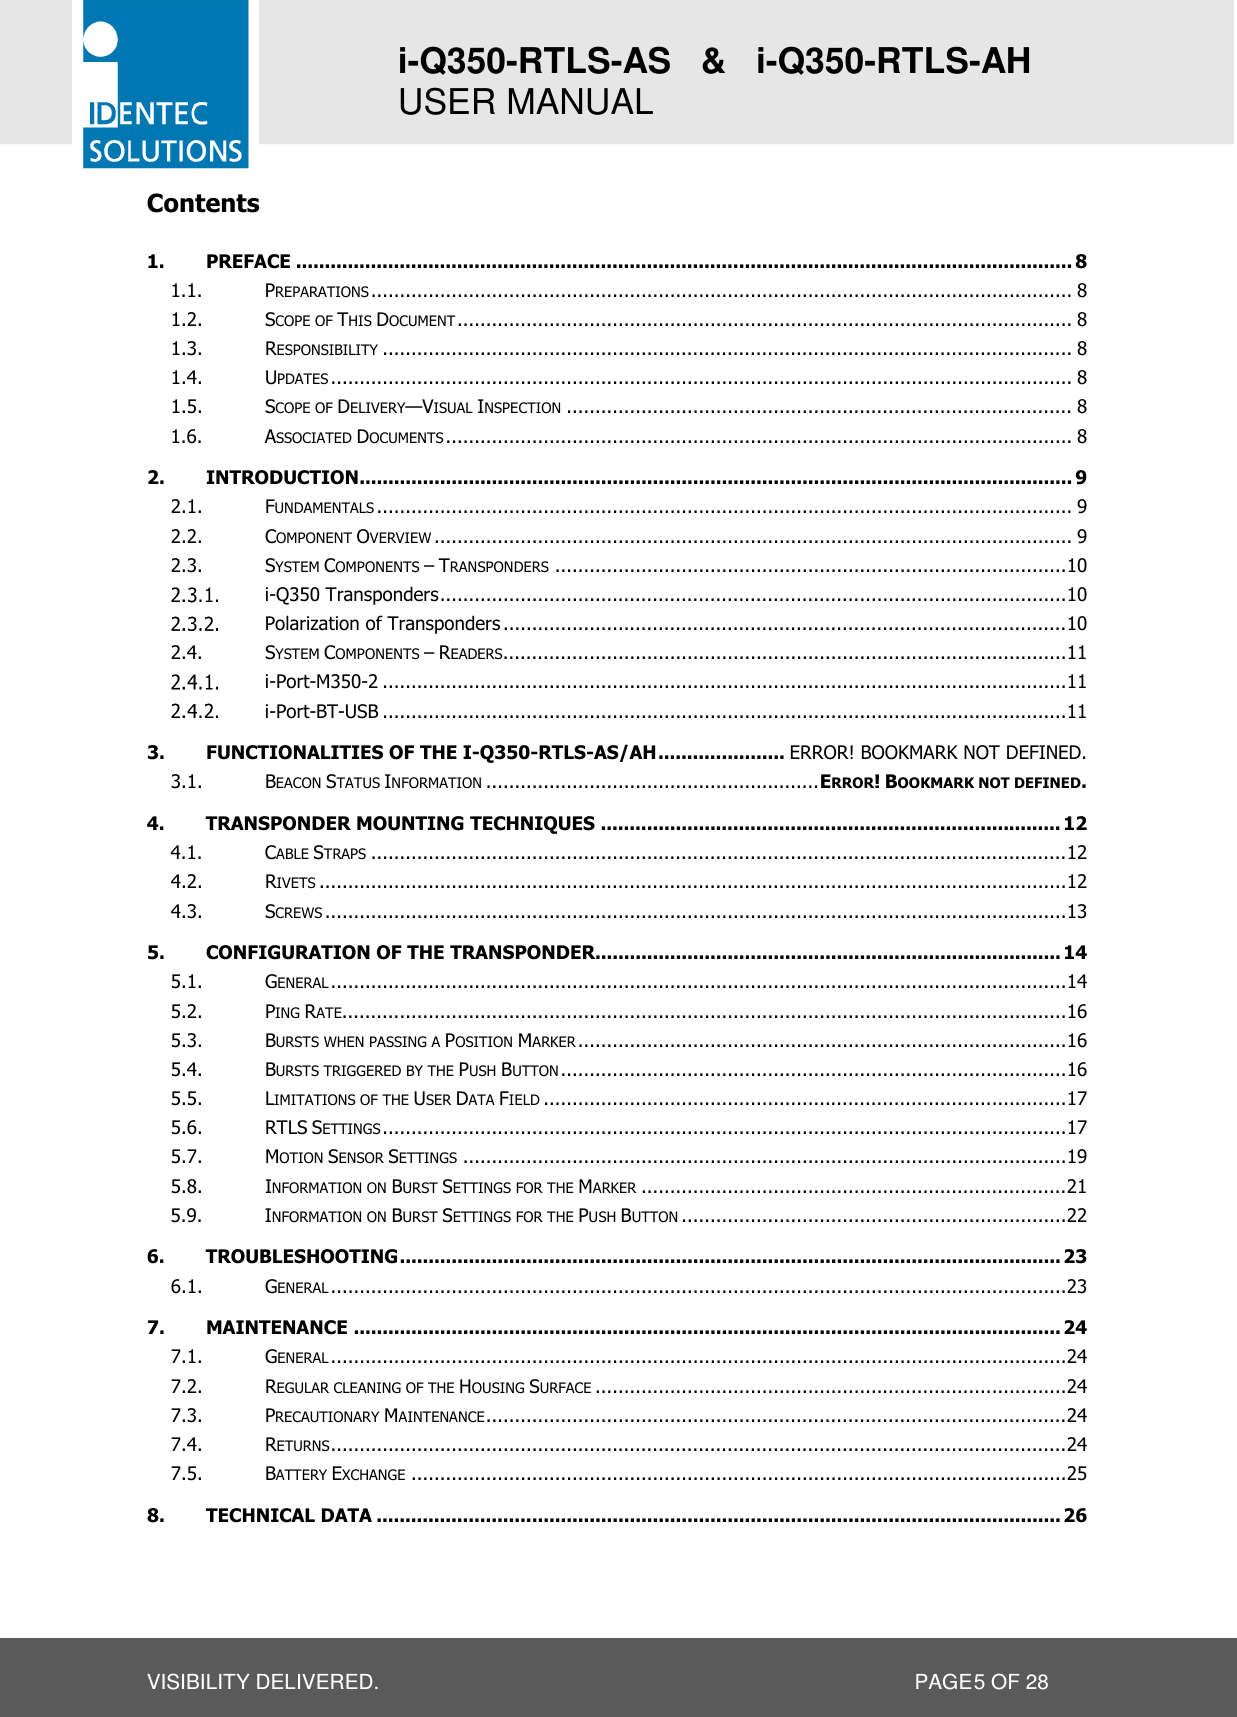 i-Q350-RTLS-AS   &amp;   i-Q350-RTLS-AH   USER MANUAL  VISIBILITY DELIVERED.                   PAGE 5 OF 28 Contents 1. PREFACE ....................................................................................................................................... 8 1.1. PREPARATIONS .......................................................................................................................... 8 1.2. SCOPE OF THIS DOCUMENT ........................................................................................................... 8 1.3. RESPONSIBILITY ........................................................................................................................ 8 1.4. UPDATES ................................................................................................................................. 8 1.5. SCOPE OF DELIVERY—VISUAL INSPECTION ........................................................................................ 8 1.6. ASSOCIATED DOCUMENTS ............................................................................................................. 8 2. INTRODUCTION ............................................................................................................................ 9 2.1. FUNDAMENTALS ......................................................................................................................... 9 2.2. COMPONENT OVERVIEW ............................................................................................................... 9 2.3. SYSTEM COMPONENTS – TRANSPONDERS ......................................................................................... 10  i-Q350 Transponders ............................................................................................................. 10  Polarization of Transponders .................................................................................................. 10 2.4. SYSTEM COMPONENTS – READERS.................................................................................................. 11  i-Port-M350-2 ....................................................................................................................... 11  i-Port-BT-USB ....................................................................................................................... 11 3. FUNCTIONALITIES OF THE I-Q350-RTLS-AS/AH ...................... ERROR! BOOKMARK NOT DEFINED. 3.1. BEACON STATUS INFORMATION .......................................................... ERROR! BOOKMARK NOT DEFINED. 4. TRANSPONDER MOUNTING TECHNIQUES ................................................................................ 12 4.1. CABLE STRAPS ......................................................................................................................... 12 4.2. RIVETS .................................................................................................................................. 12 4.3. SCREWS ................................................................................................................................. 13 5. CONFIGURATION OF THE TRANSPONDER................................................................................. 14 5.1. GENERAL ................................................................................................................................ 14 5.2. PING RATE.............................................................................................................................. 16 5.3. BURSTS WHEN PASSING A POSITION MARKER ..................................................................................... 16 5.4. BURSTS TRIGGERED BY THE PUSH BUTTON ........................................................................................ 16 5.5. LIMITATIONS OF THE USER DATA FIELD ........................................................................................... 17 5.6. RTLS SETTINGS ....................................................................................................................... 17 5.7. MOTION SENSOR SETTINGS ......................................................................................................... 19 5.8. INFORMATION ON BURST SETTINGS FOR THE MARKER .......................................................................... 21 5.9. INFORMATION ON BURST SETTINGS FOR THE PUSH BUTTON ................................................................... 22 6. TROUBLESHOOTING ................................................................................................................... 23 6.1. GENERAL ................................................................................................................................ 23 7. MAINTENANCE ........................................................................................................................... 24 7.1. GENERAL ................................................................................................................................ 24 7.2. REGULAR CLEANING OF THE HOUSING SURFACE .................................................................................. 24 7.3. PRECAUTIONARY MAINTENANCE ..................................................................................................... 24 7.4. RETURNS ................................................................................................................................ 24 7.5. BATTERY EXCHANGE .................................................................................................................. 25 8. TECHNICAL DATA ....................................................................................................................... 26  